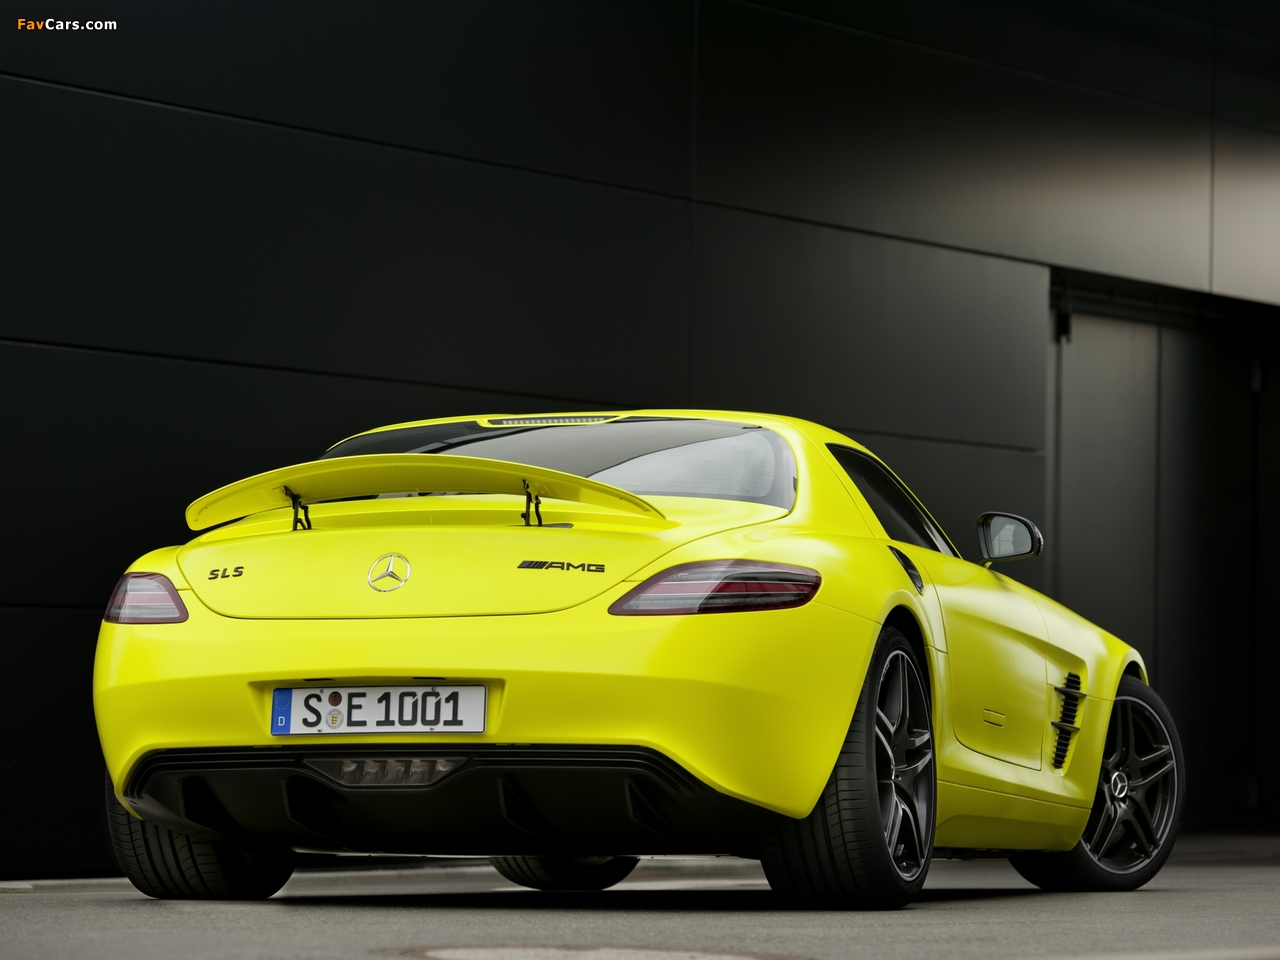 Mercedes-Benz SLS 63 AMG E-Cell Prototype (C197) 2010 pictures (1280 x 960)